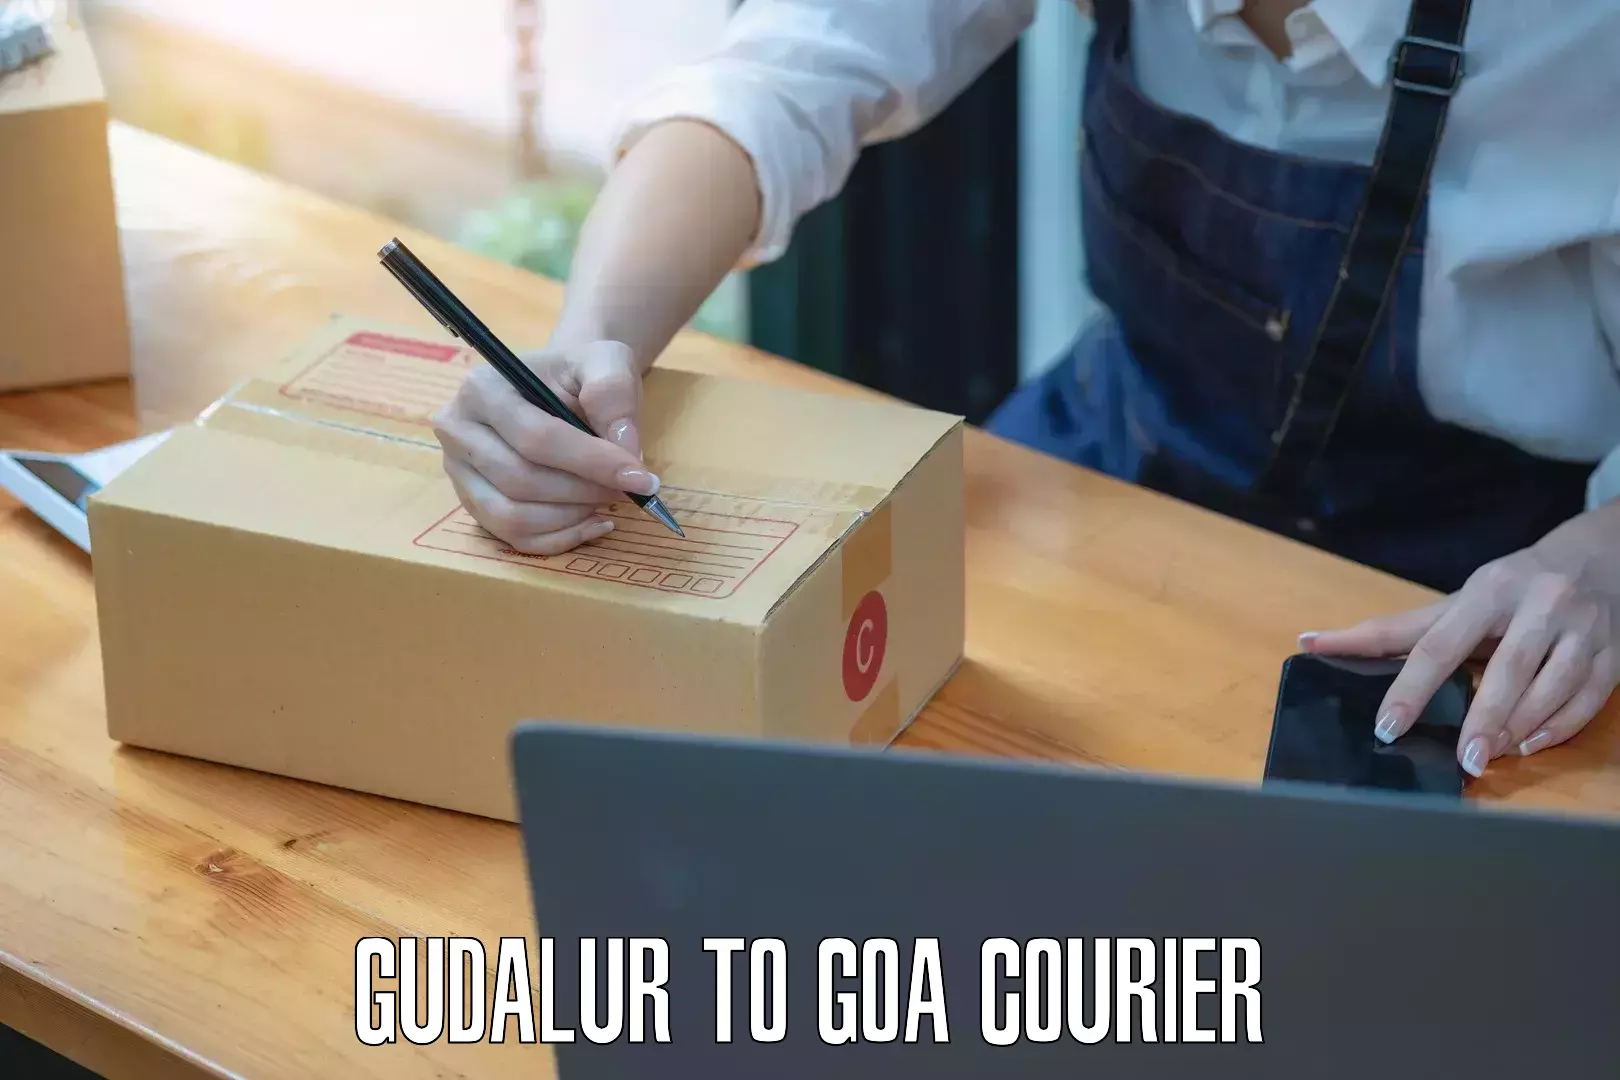 Cash on delivery service Gudalur to Panaji